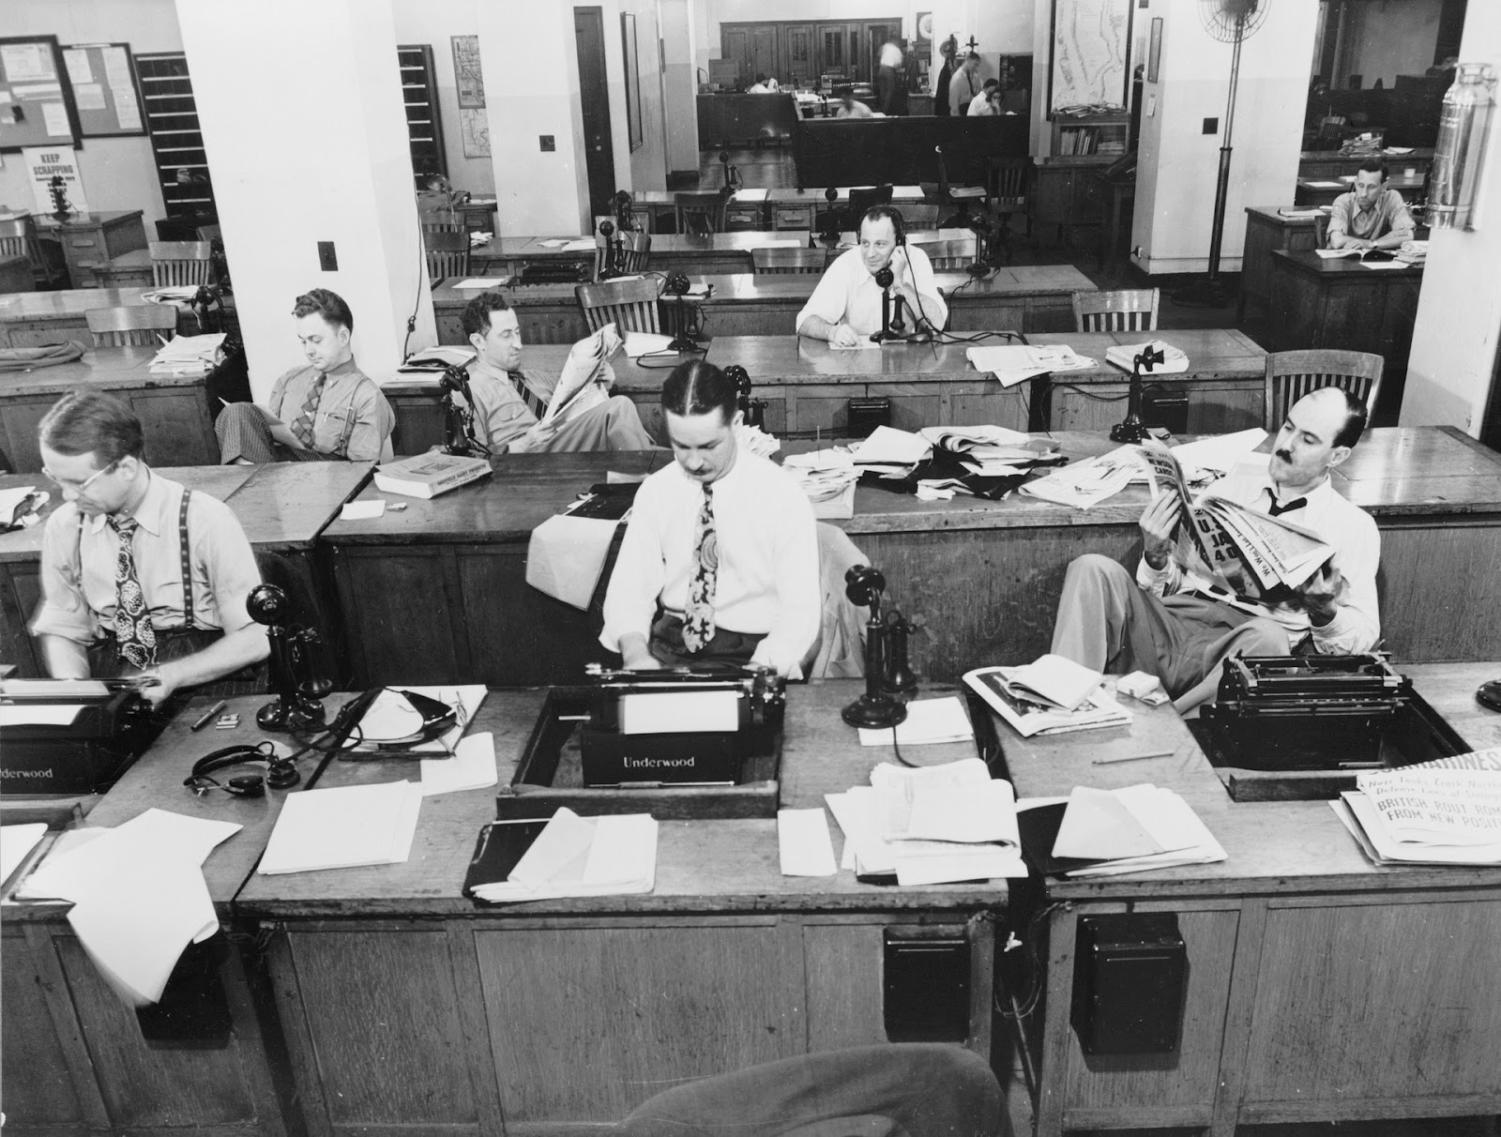 1942 - Journalists for the New York Times work and read the newspaper. Eighty years later, journalism has changed radically and, as new technologies continue to emerge, it is almost guaranteed journalism will continue to change.